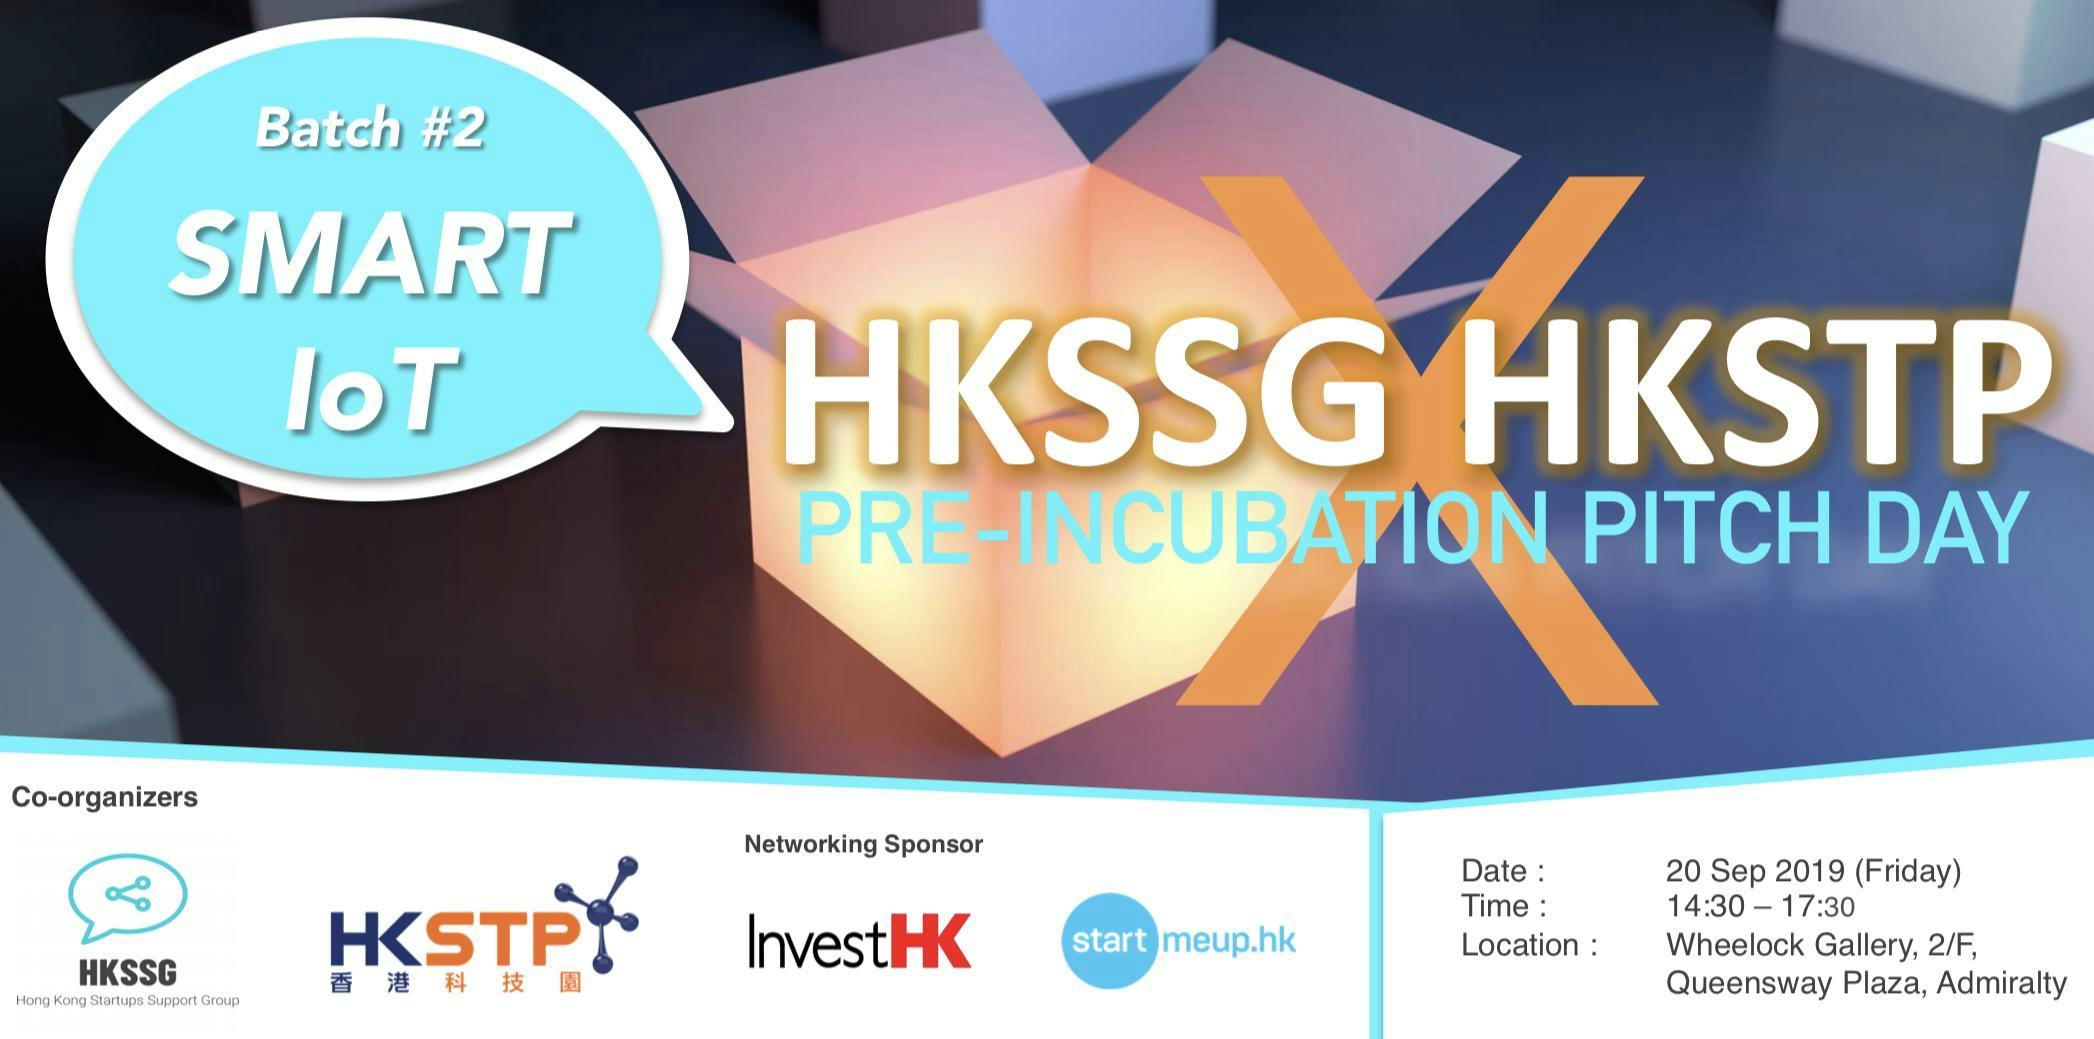 HKSSG x HKSTP Pre-Incubation Pitch Day